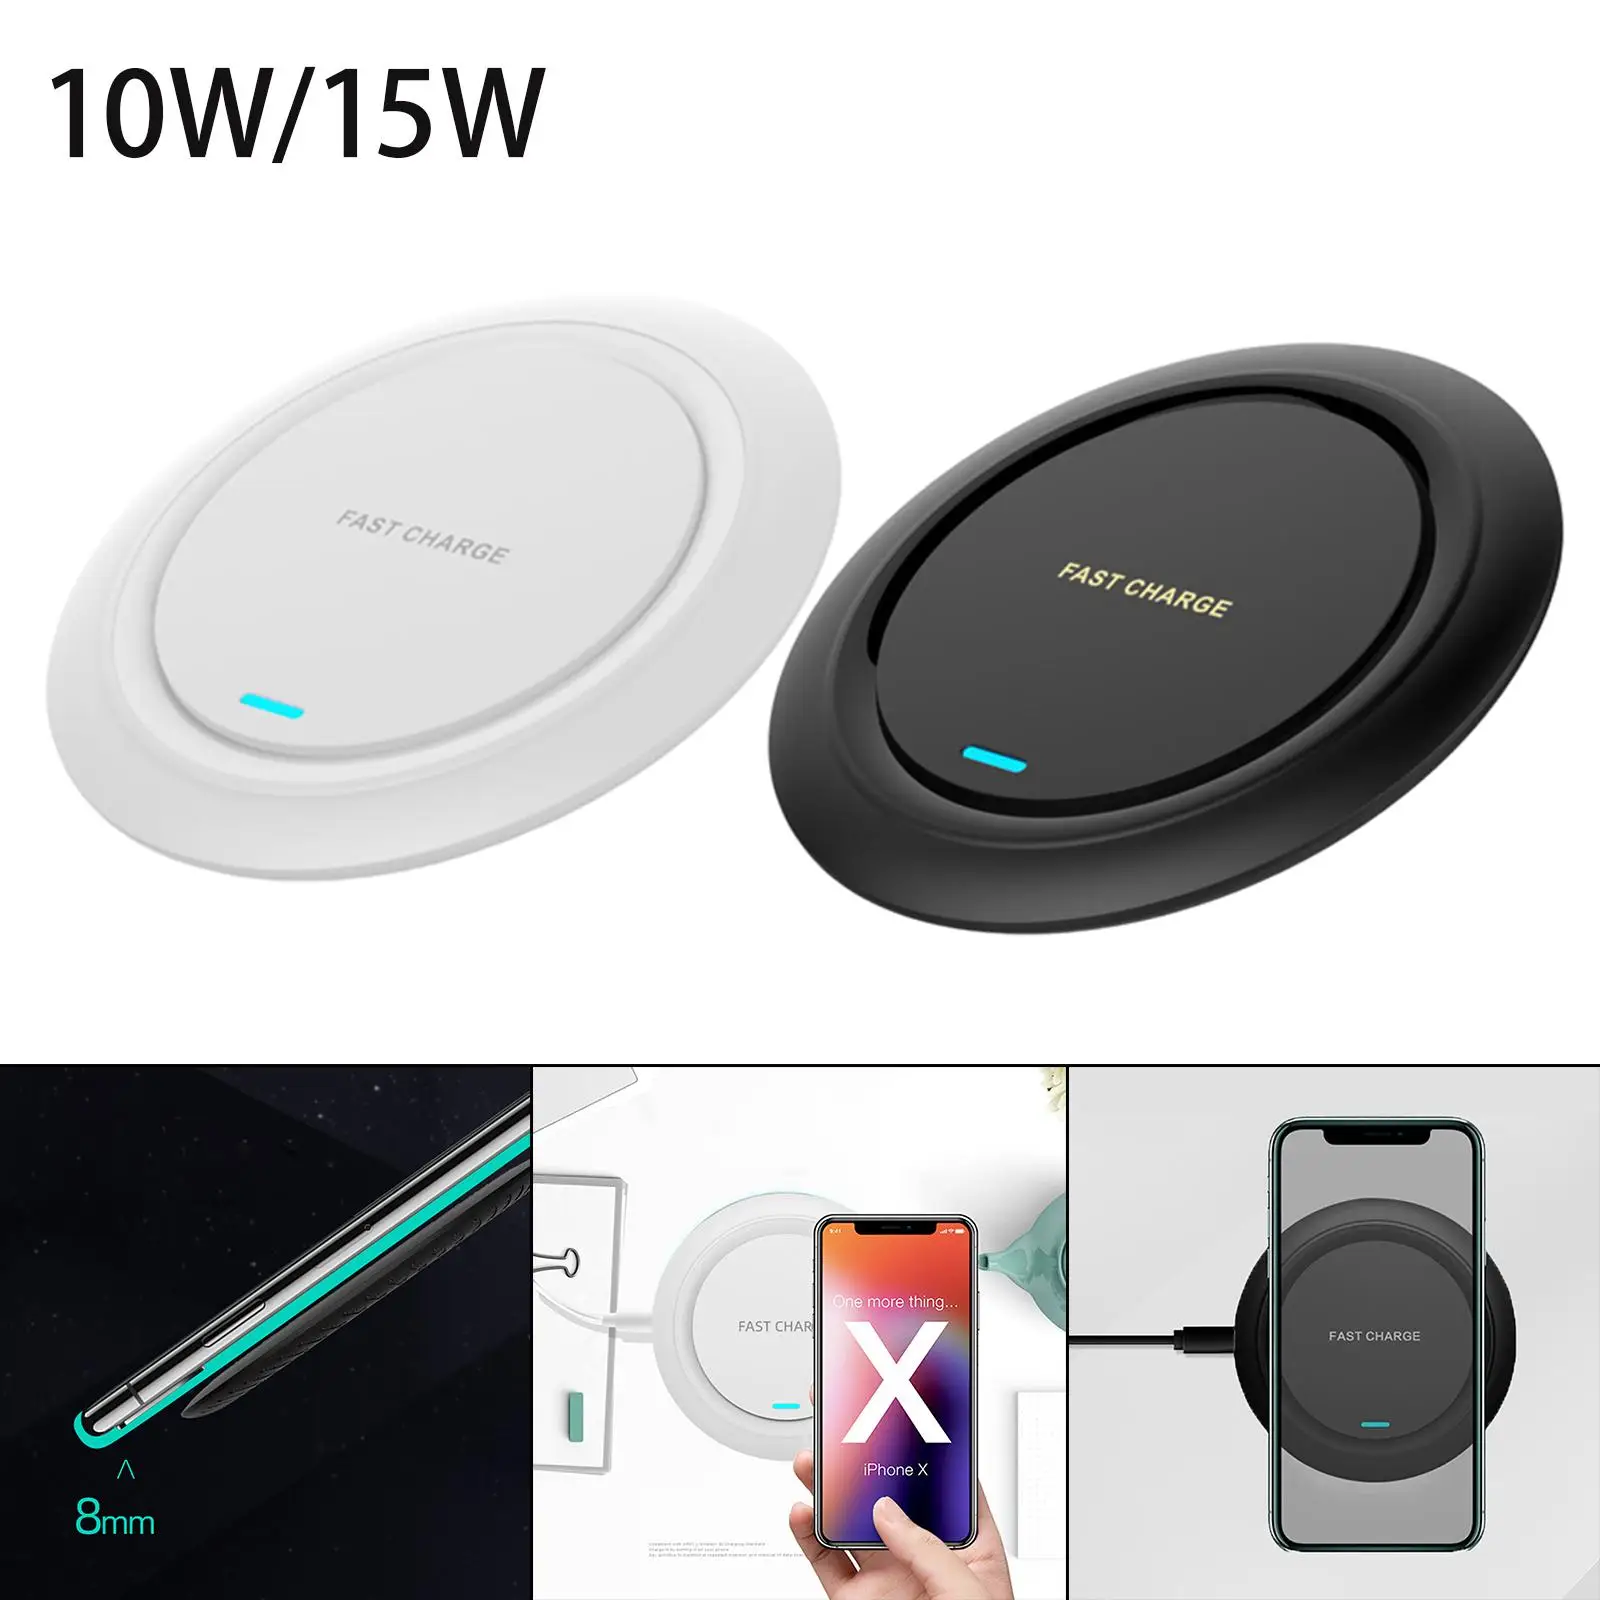 Wireless Charger Qi-Certified Multi-Function Protection 10W/15W Full Mirror Screen 2000MA Adapter for iPhone x All Smartphones